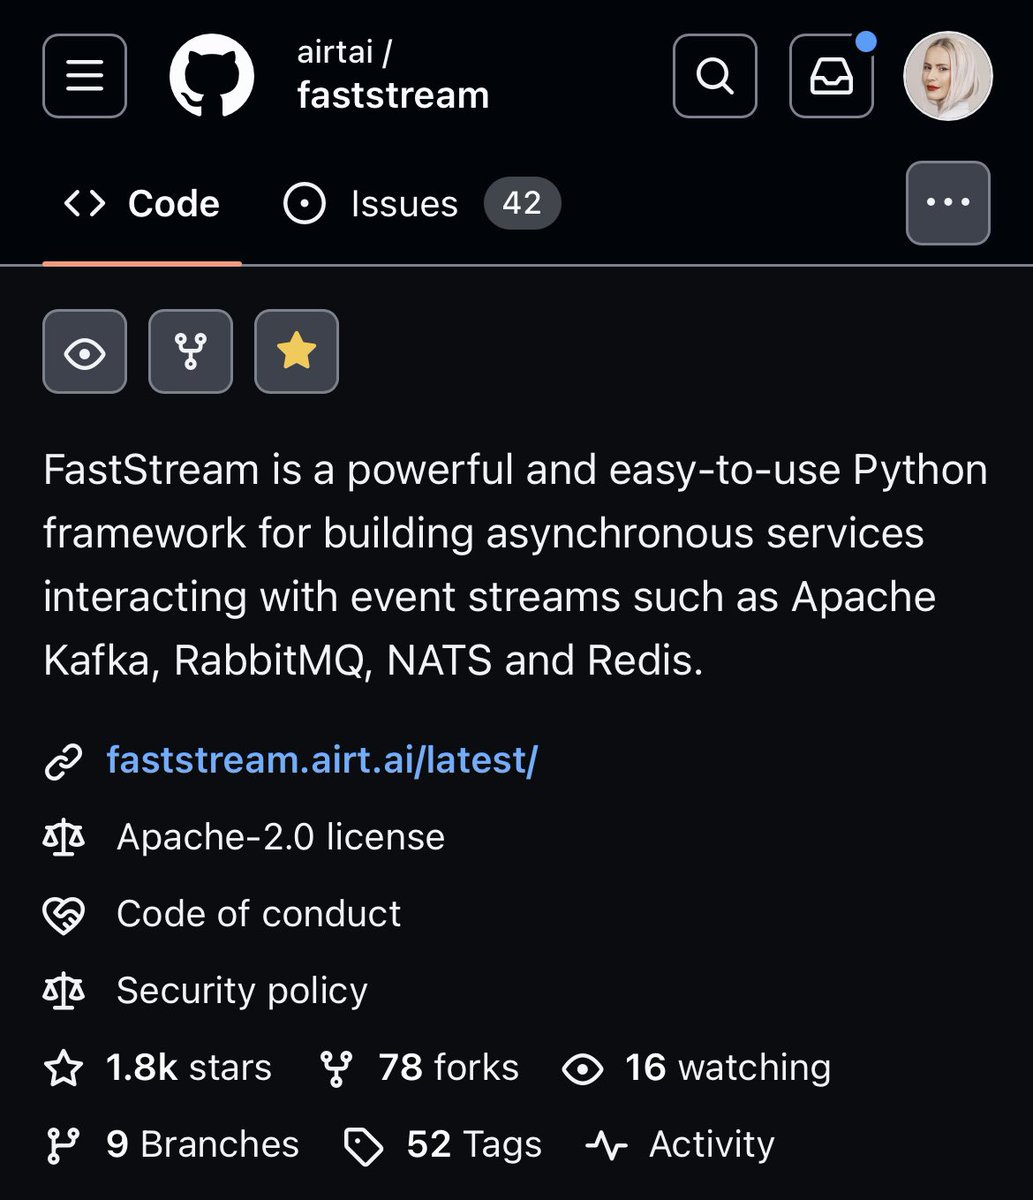 Aaand we’re already at ⭐ 1800 ⭐ on #GitHub! 🤩 #FastStream ❤️#DEVCommunity! 

FastStream: bit.ly/FastStreamFram…
Discord: bit.ly/FastStreamDisc…

#Python #Kafka #RabbitMQ #NATS #Redis #Confluent #opensource #streaming